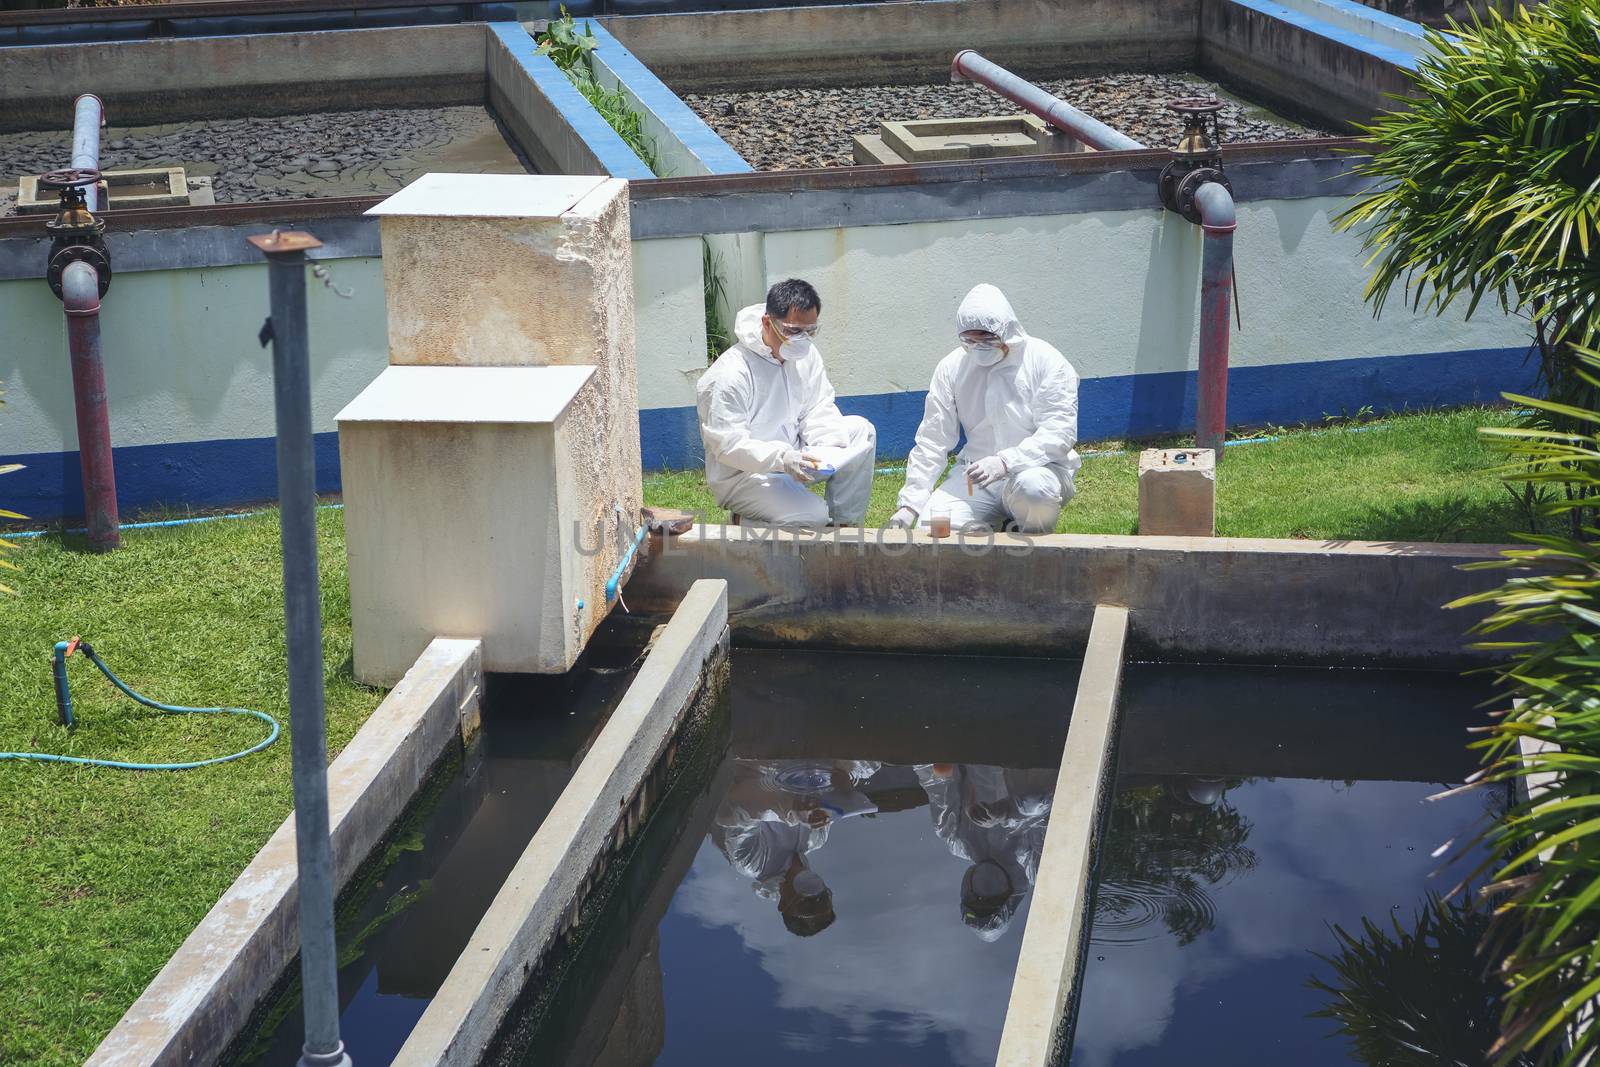 Scientists are examining the quality of waste water treatment systems to control chemicals before releasing water to the environment.